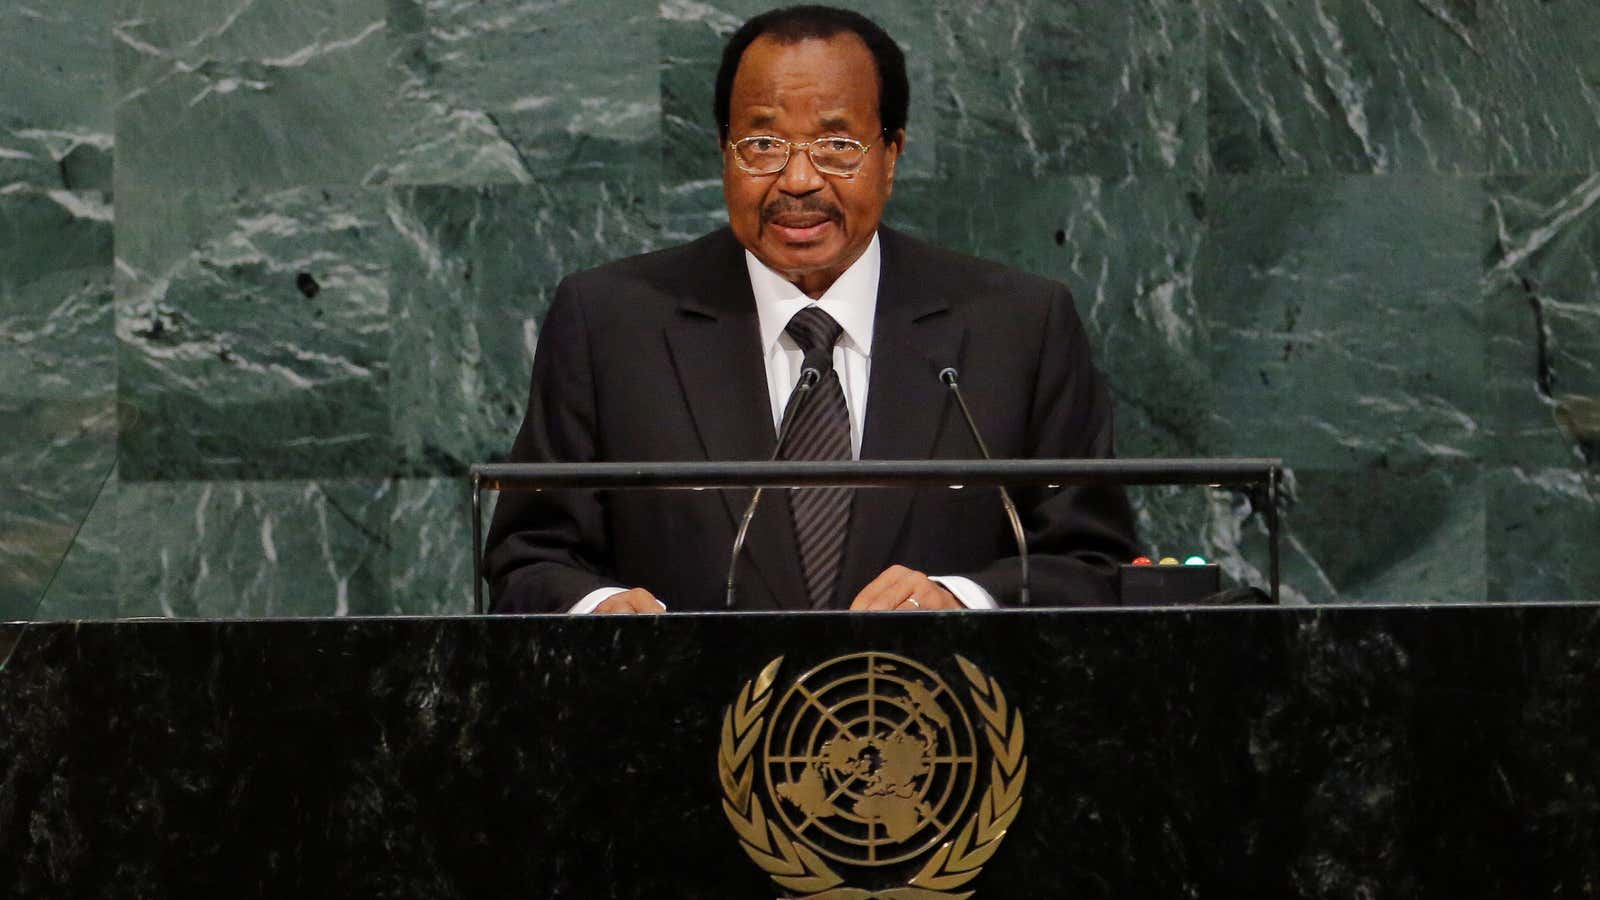 Cameroon president Paul Biya, addresses the 72nd UN General Assembly